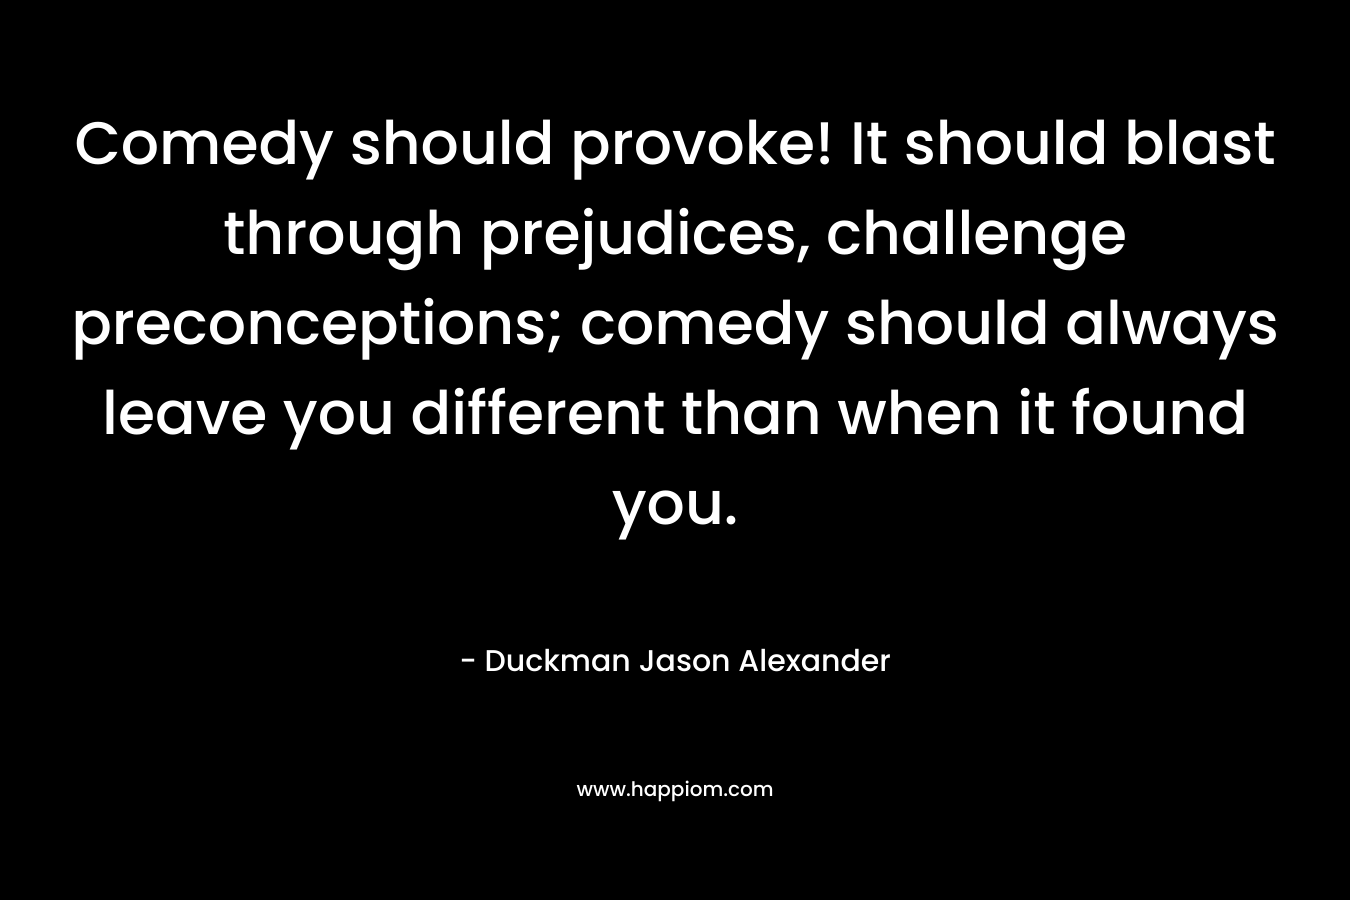 Comedy should provoke! It should blast through prejudices, challenge preconceptions; comedy should always leave you different than when it found you. – Duckman Jason Alexander